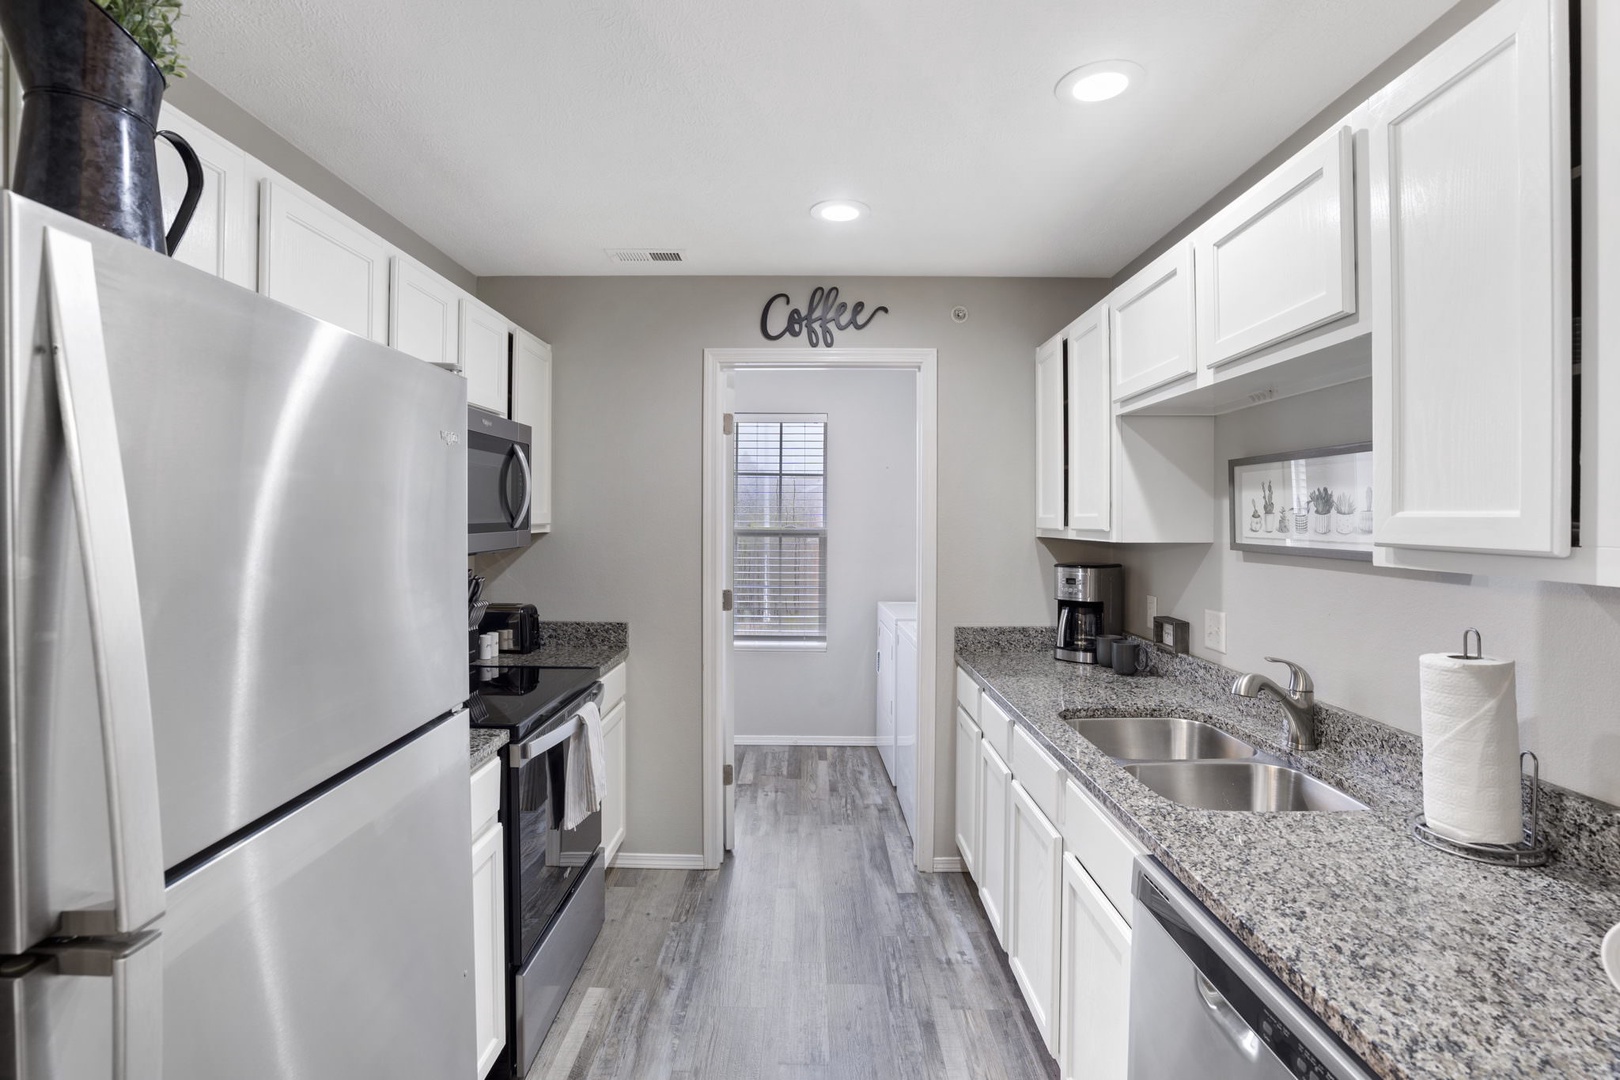 Full kitchen with stainless-steel appliances (Unit #4)